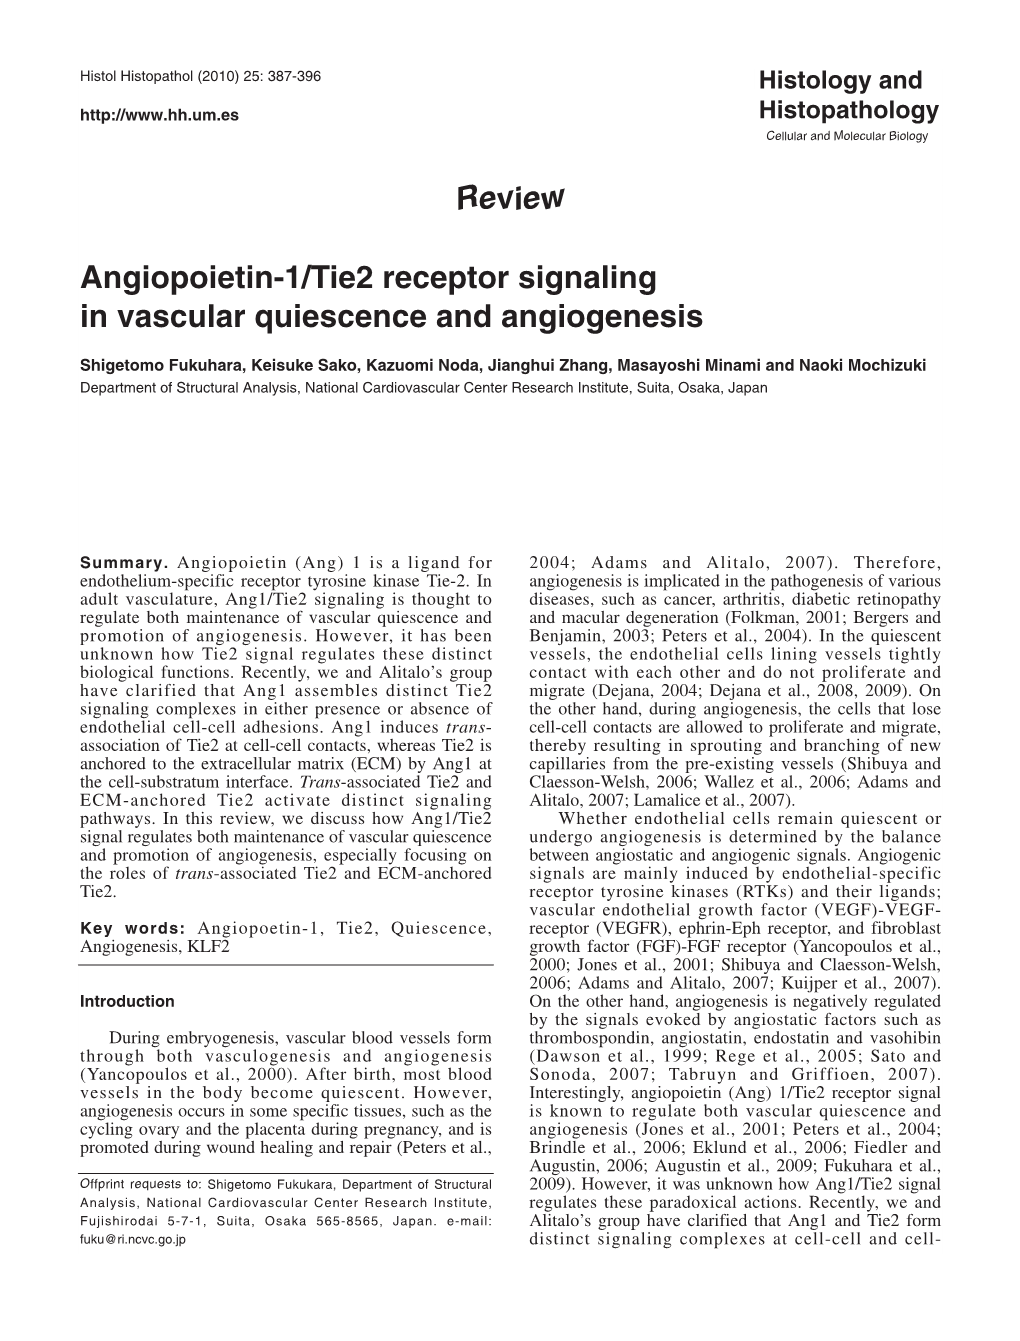 Review Angiopoietin-1/Tie2 Receptor Signaling in Vascular Quiescence